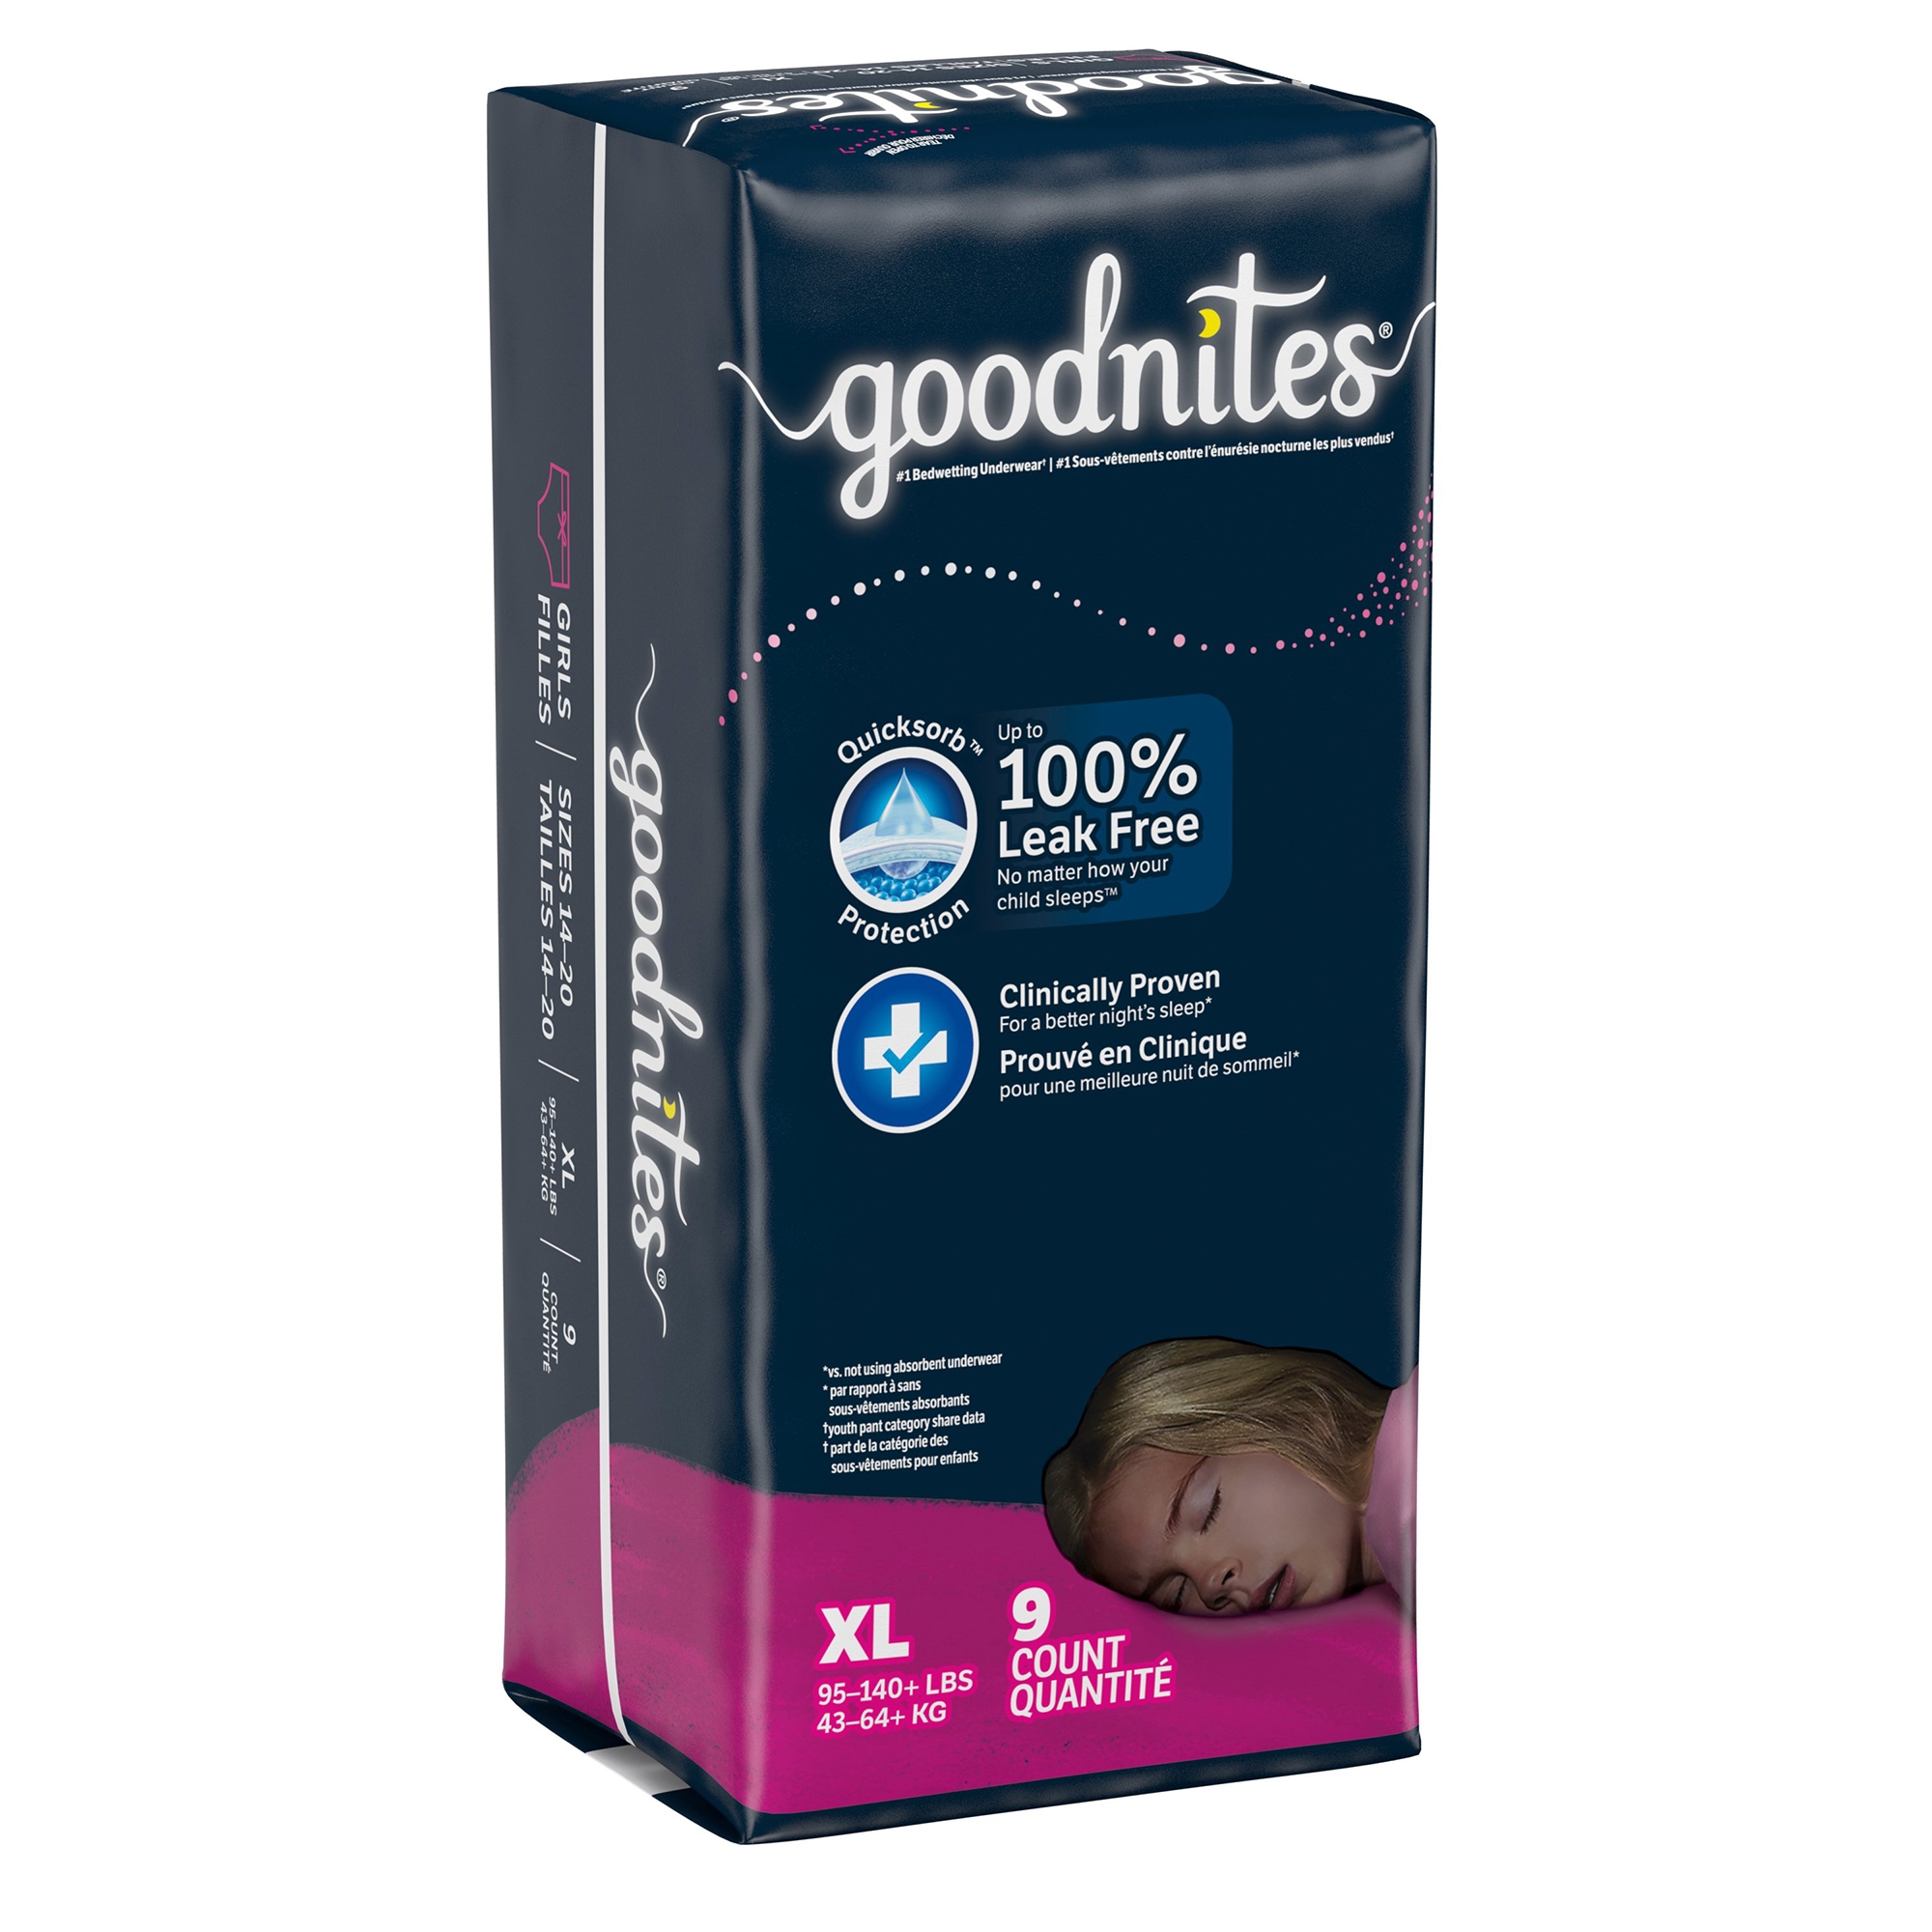 GoodNites Girls Bed Wetting Pants - One Stop Bedwetting